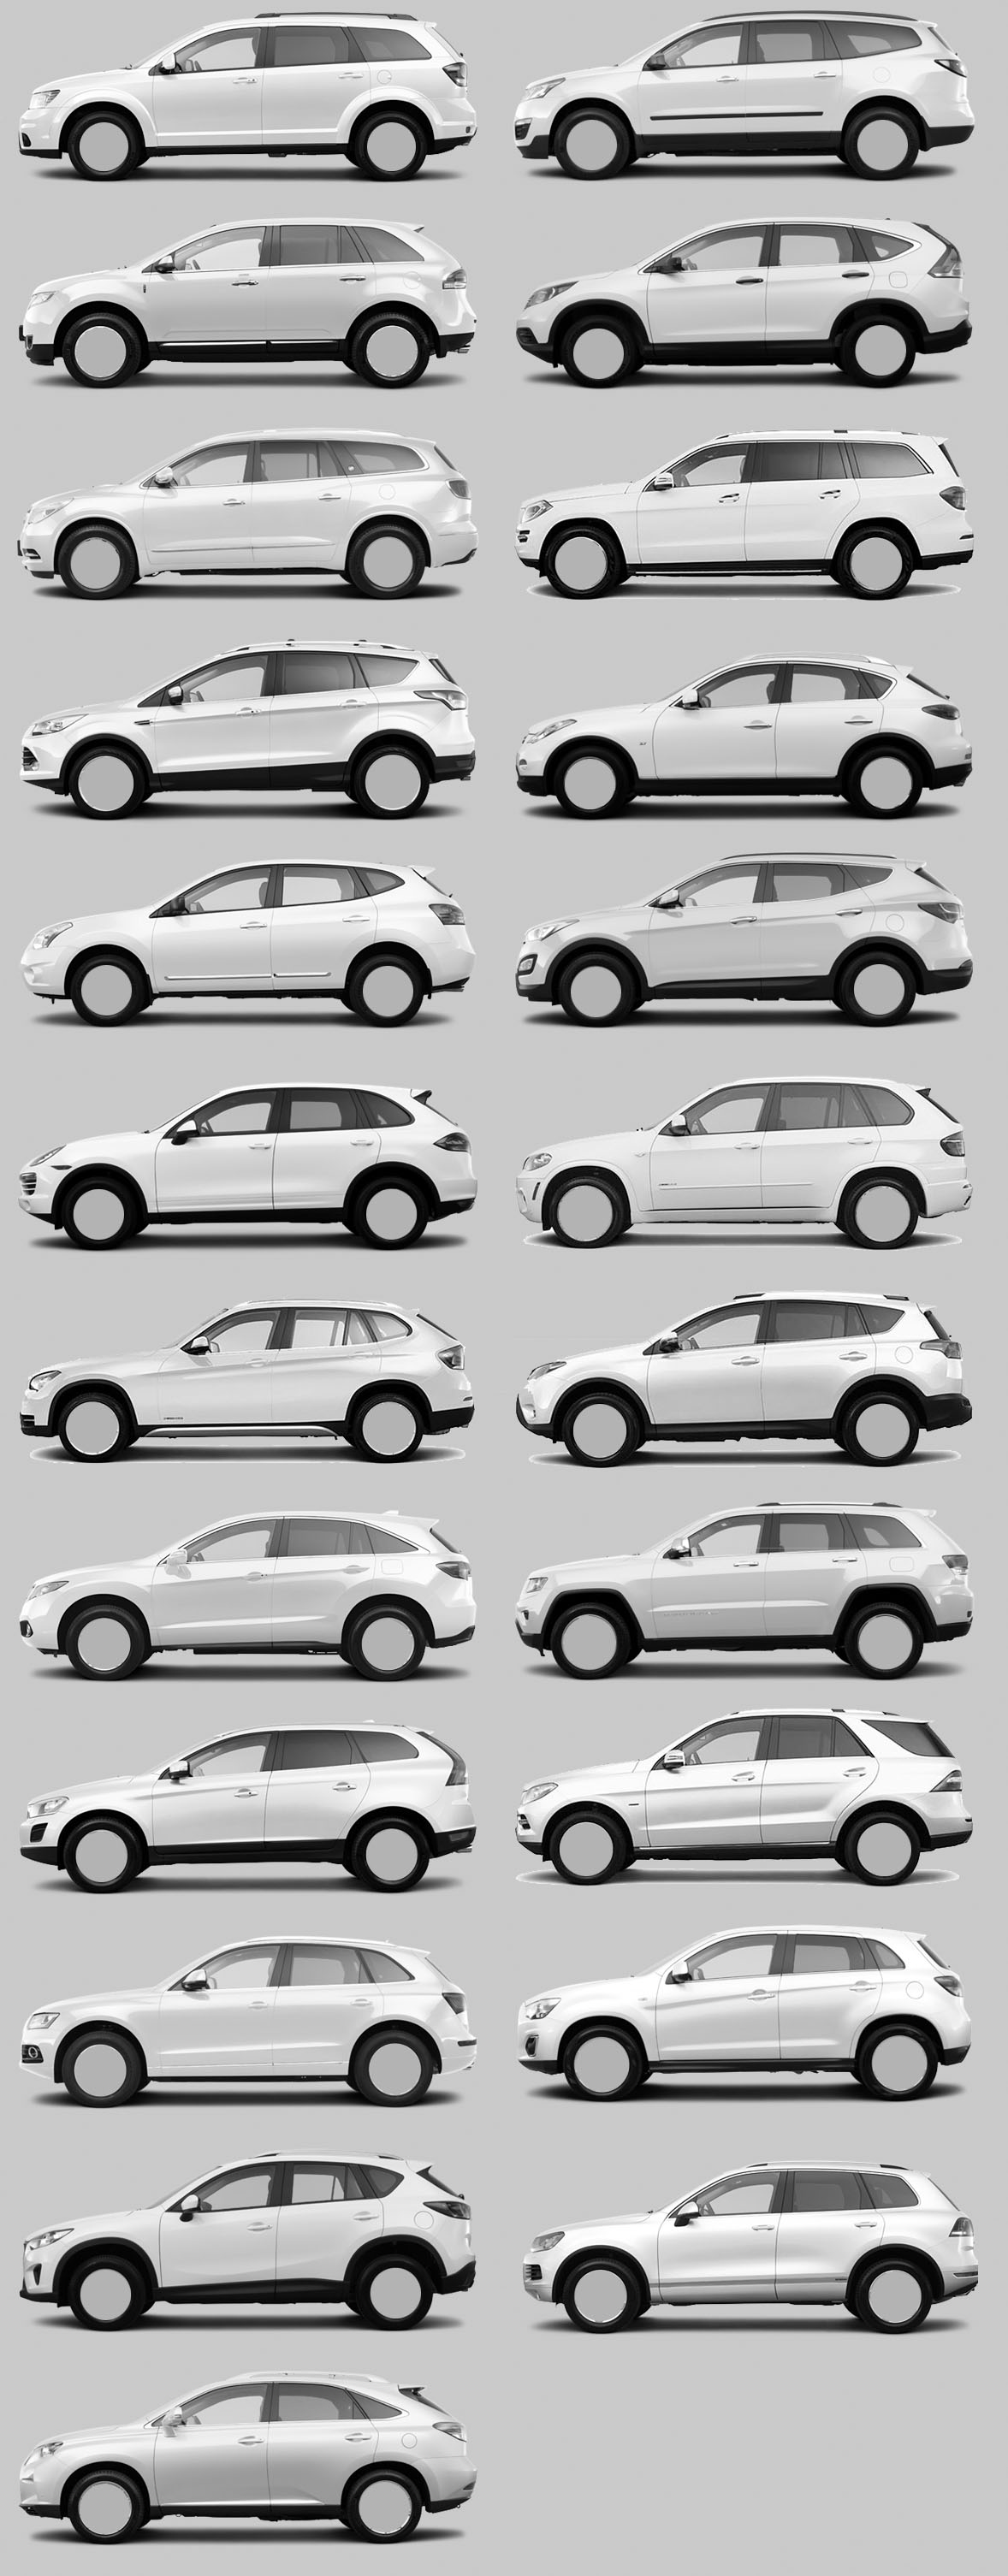 Can you match the crossover to its corresponding brand? The answers are below.